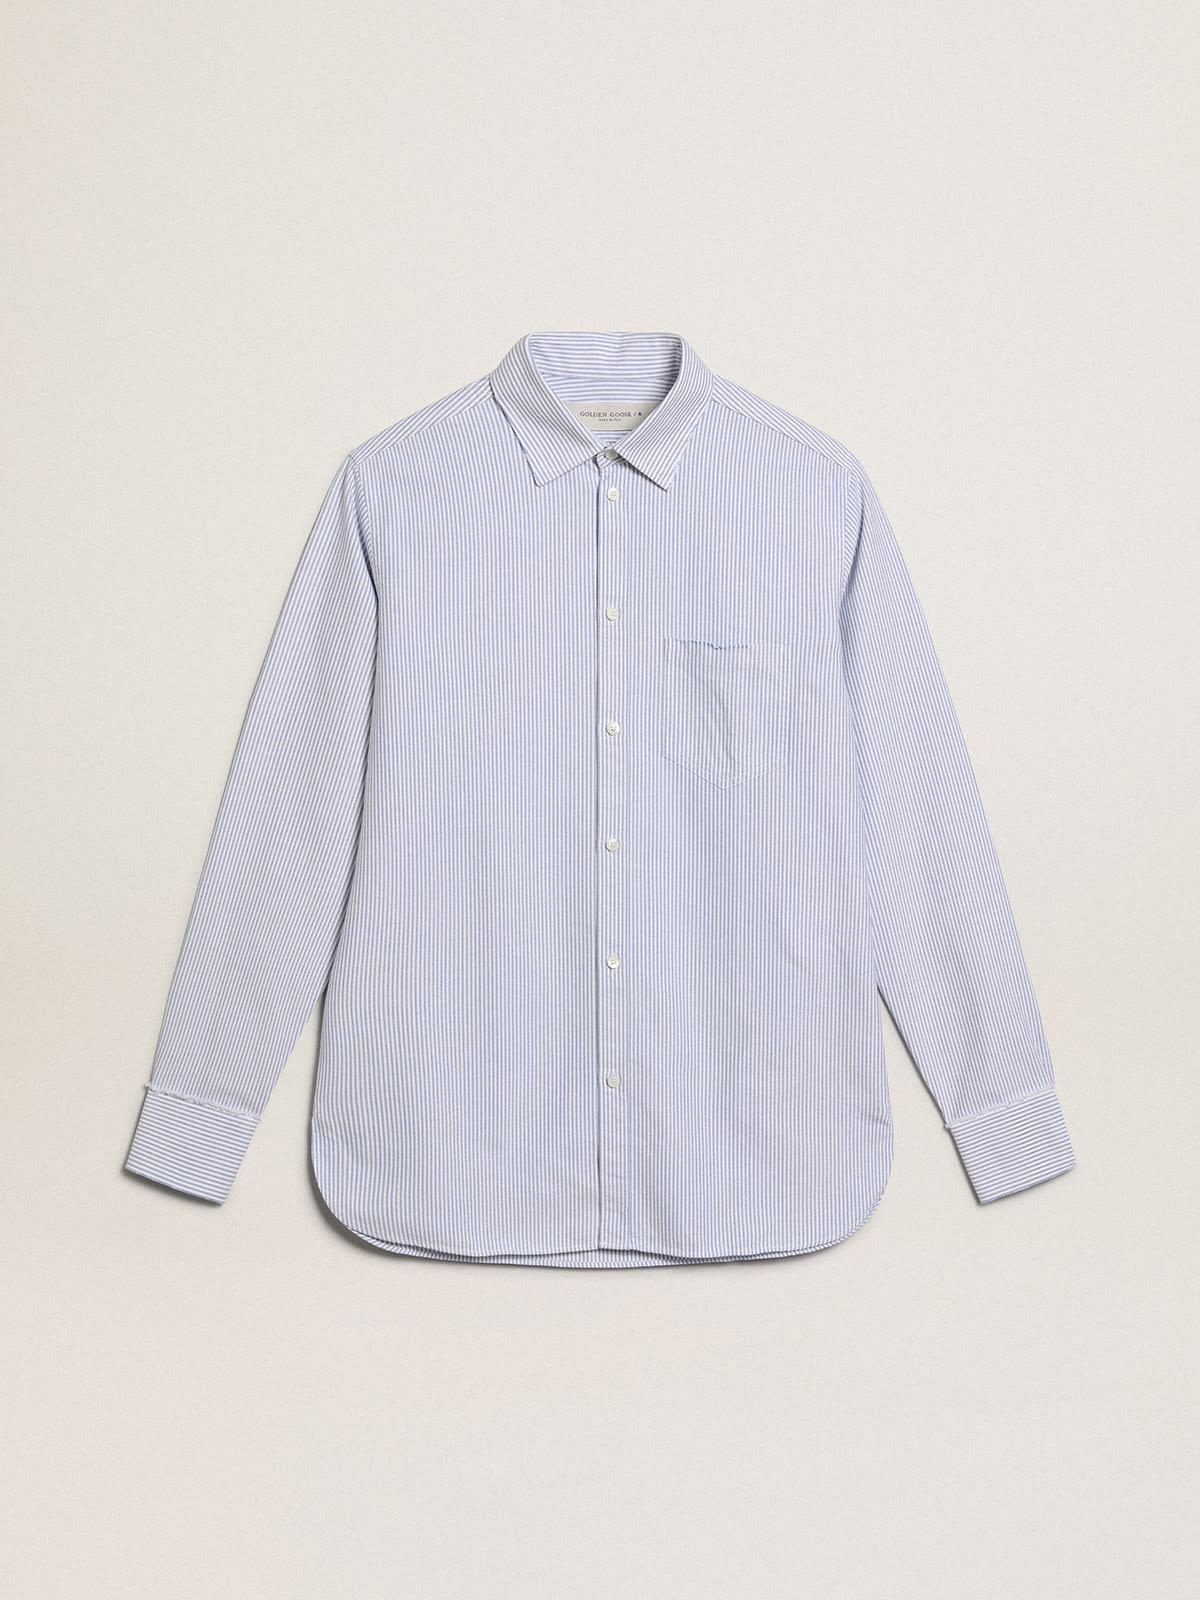 Golden Goose - Men's shirt with narrow stripes in 